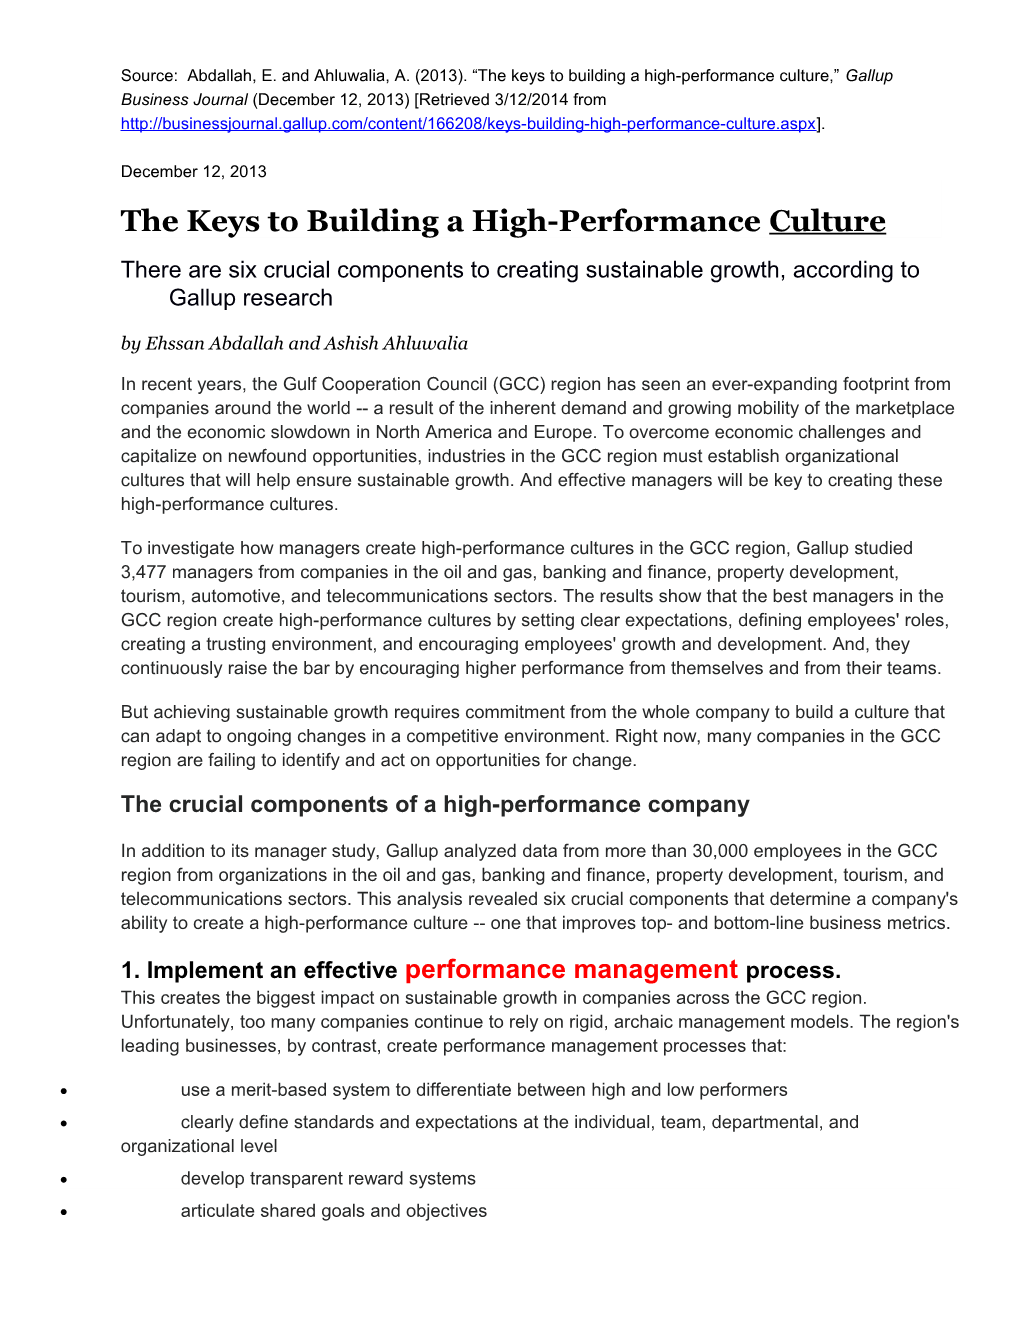 The Keys to Building a High-Performance Culture